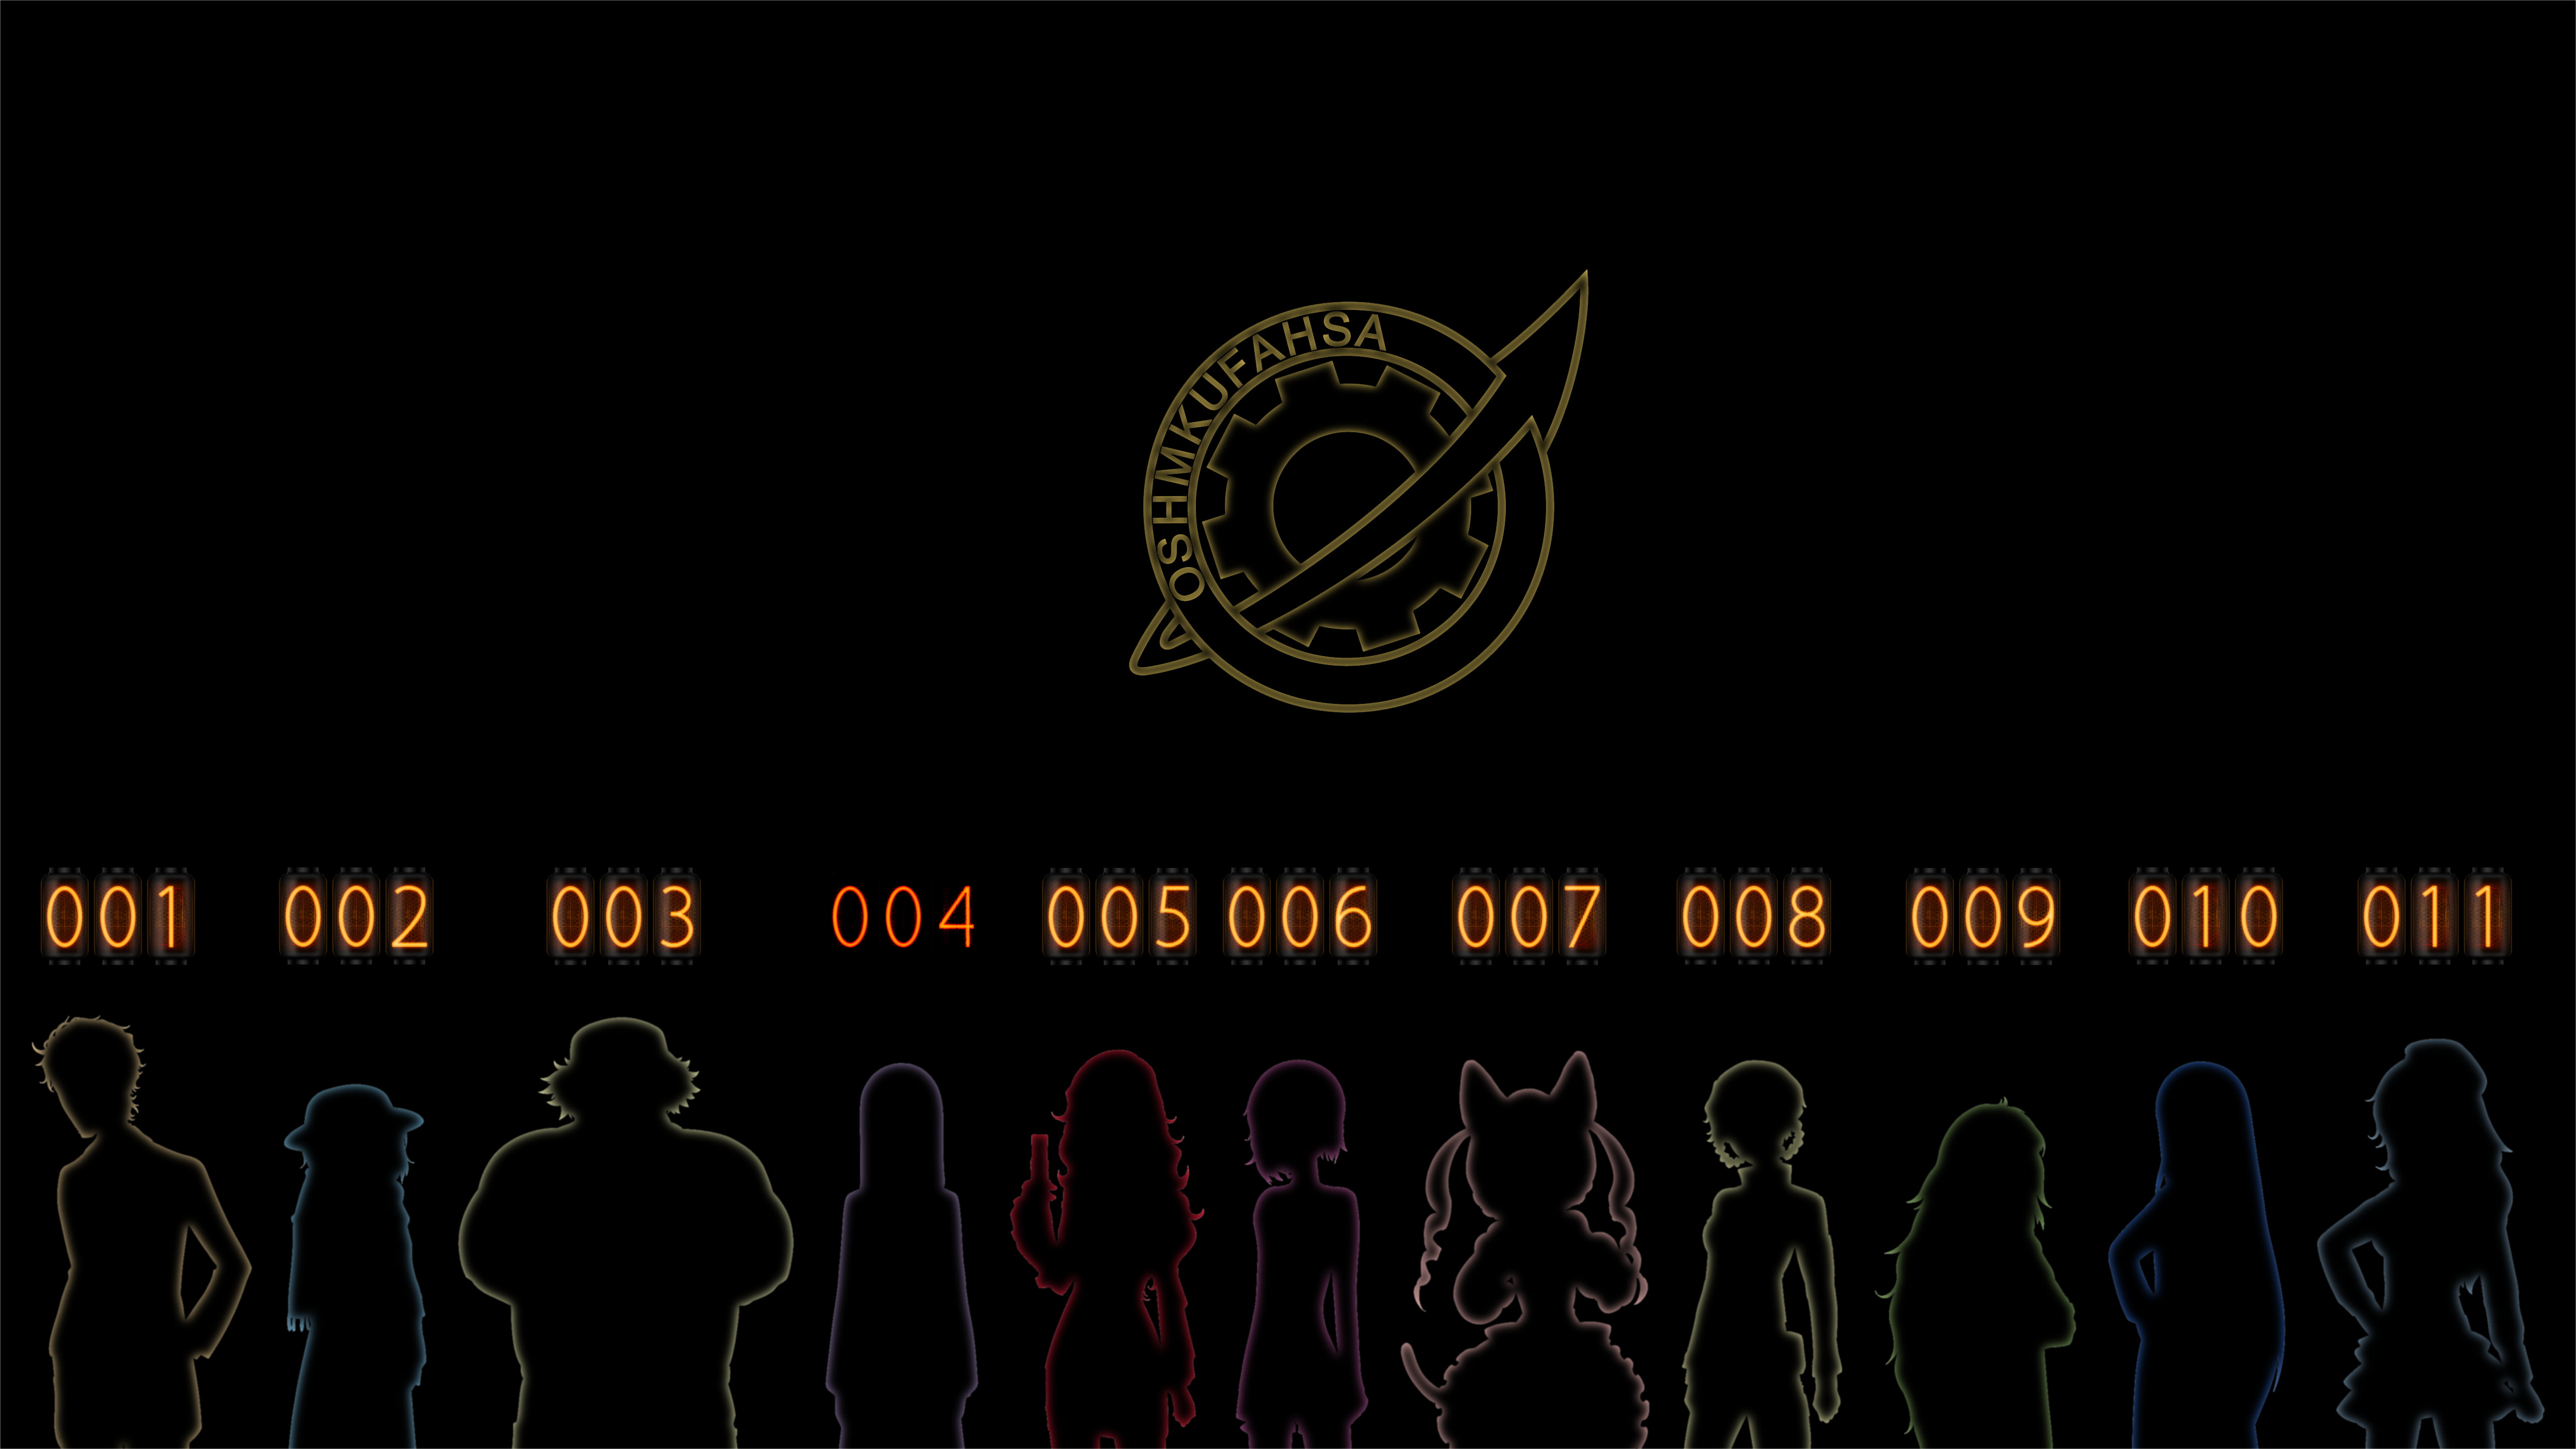 silhouette of characters wallpaper, Steins;Gate 0, spoilers